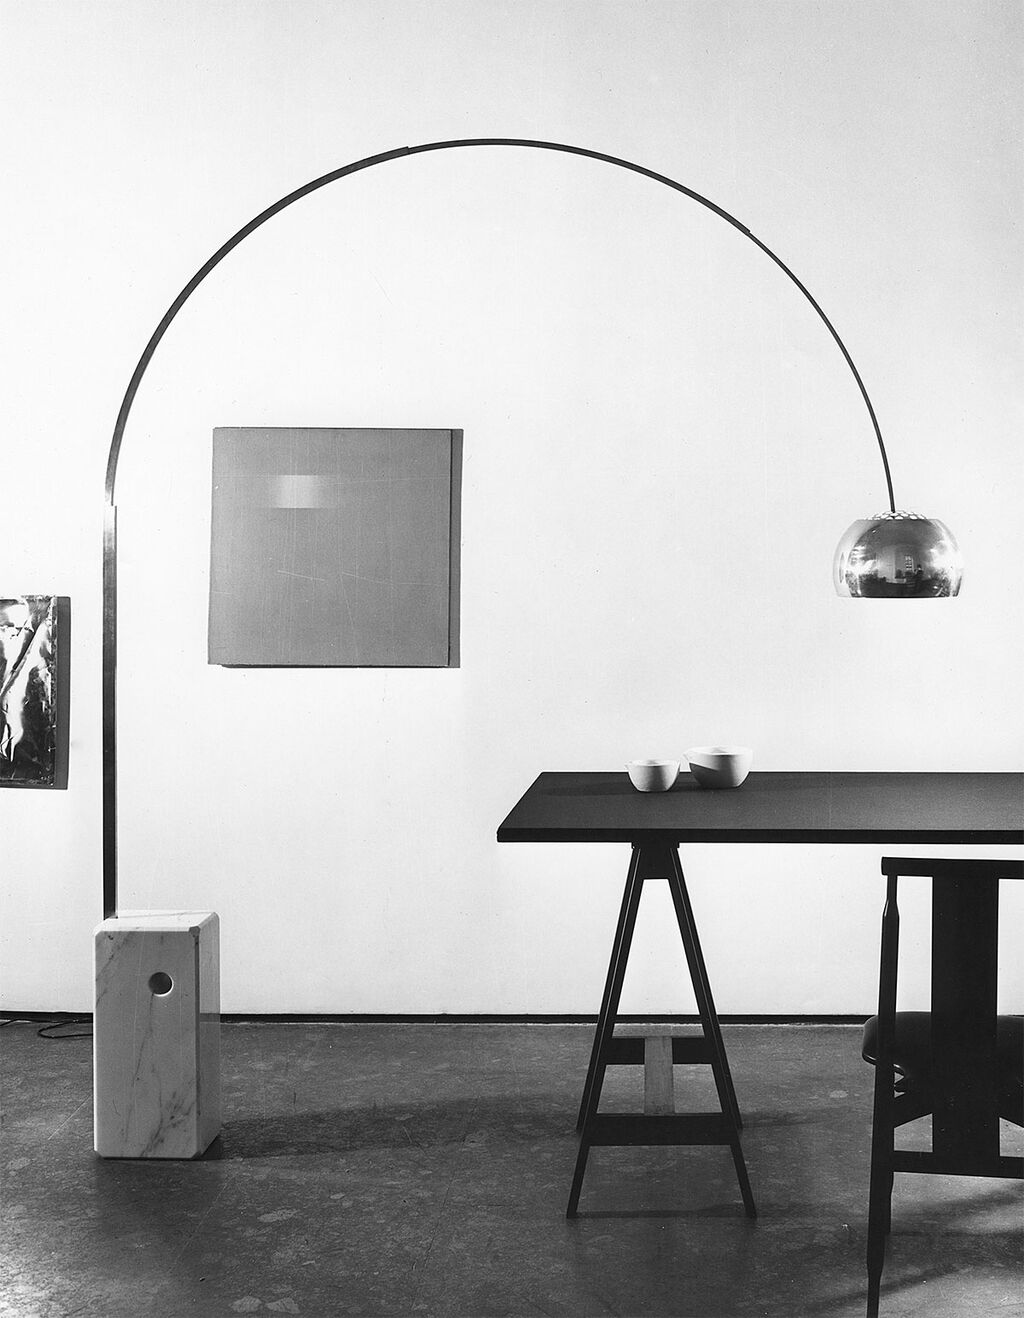 The Arco lamp by and Pier Giacomo Castiglioni: history of a design